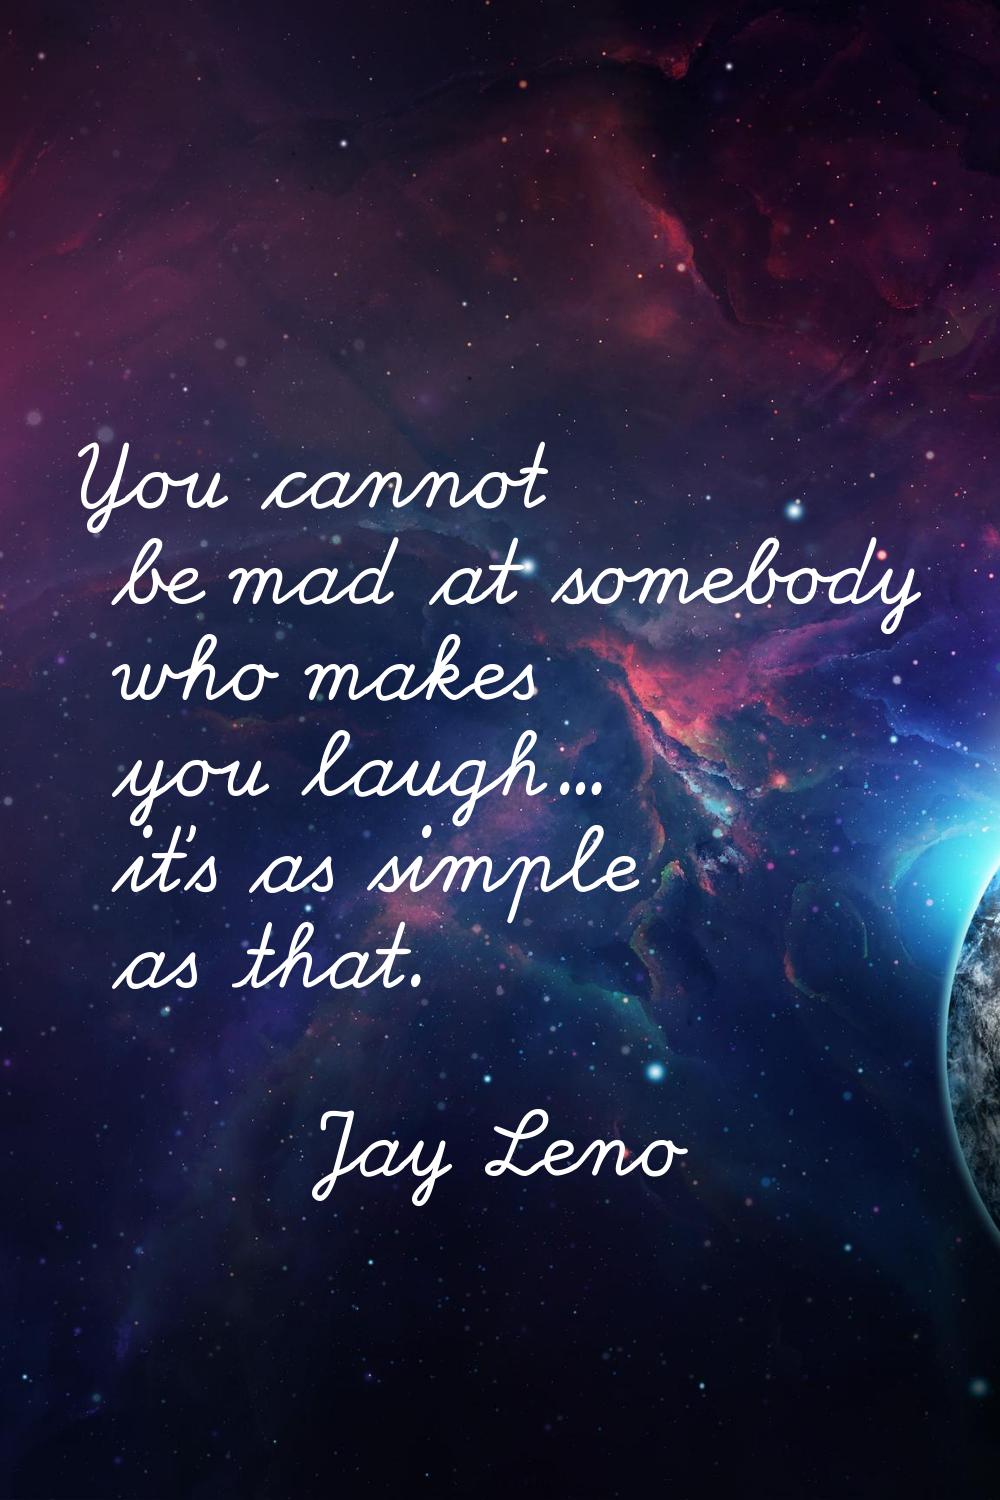 You cannot be mad at somebody who makes you laugh... it's as simple as that.